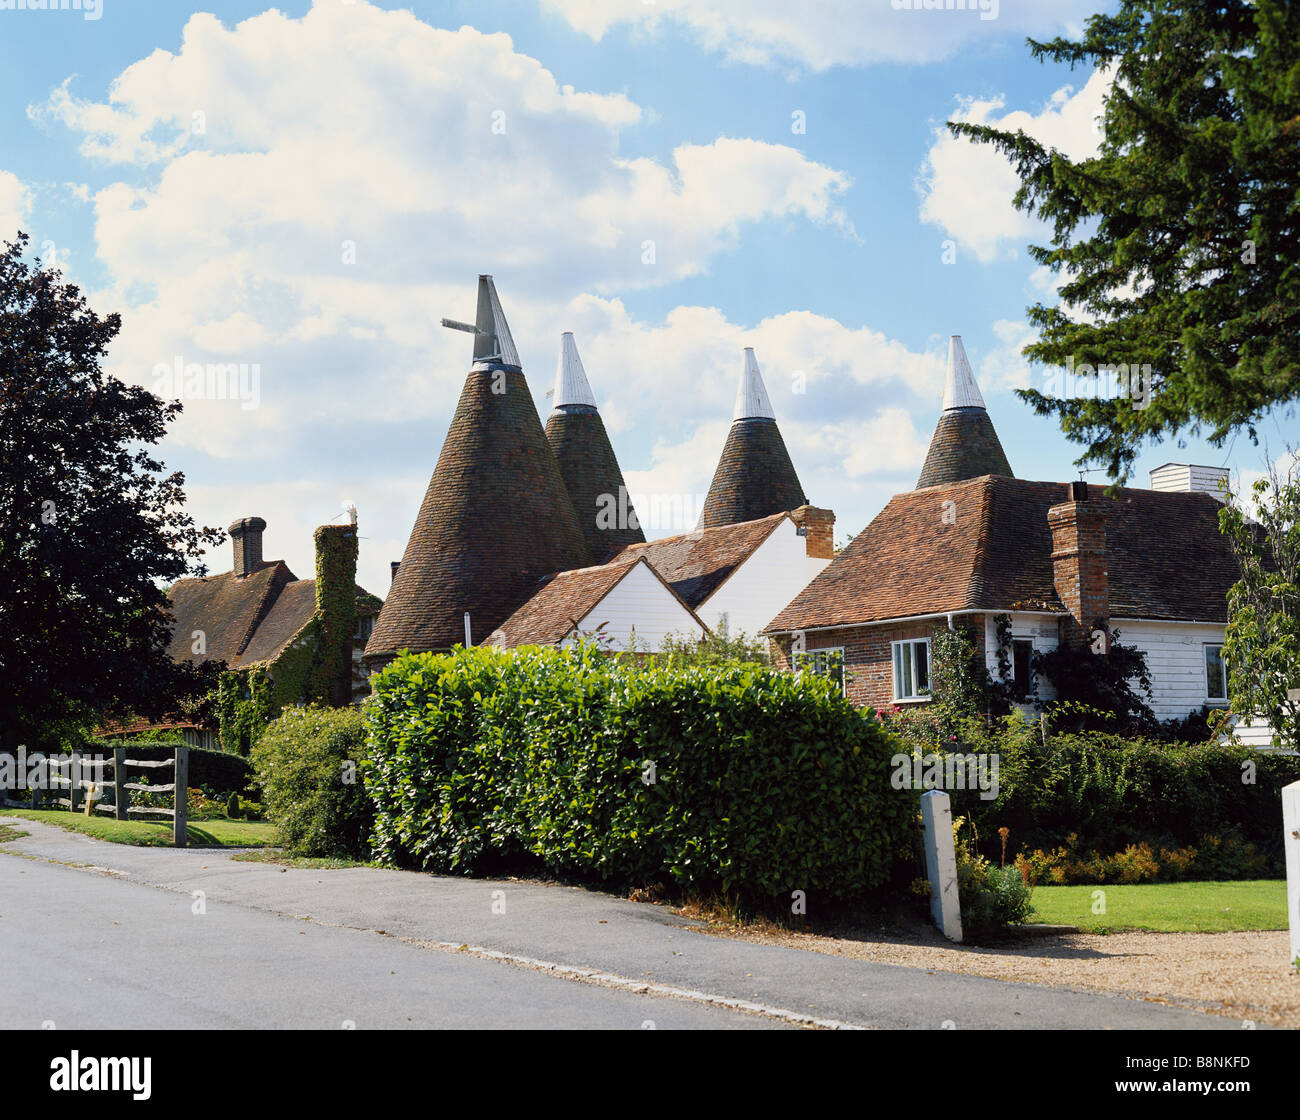 Maisons Oast converties à Easthurst Green, East Sussex, Angleterre, Royaume-Uni, GB Banque D'Images